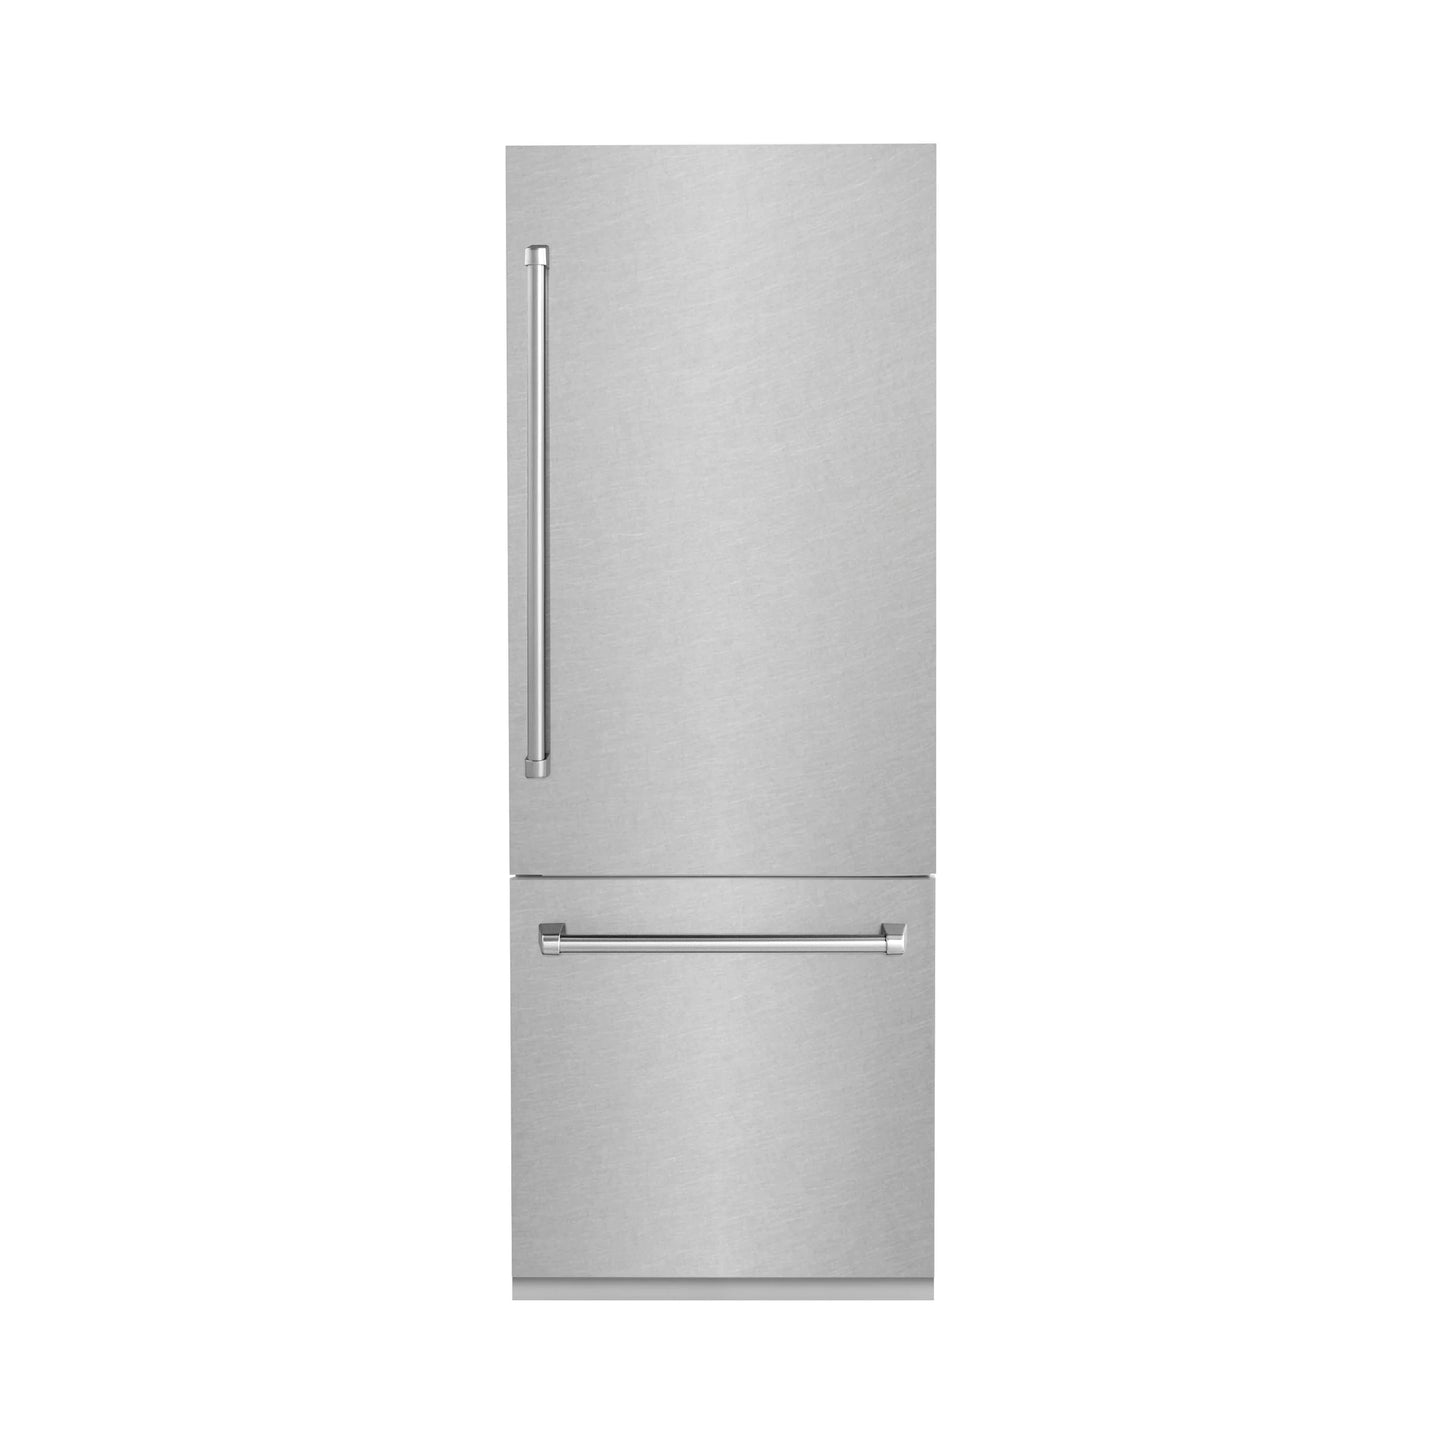 ZLINE 30" 16.1 cu. ft. Built-In Refrigerator with Internal Water and Ice Dispenser in Fingerprint Resistant Stainless Steel, RBIV-SN-30